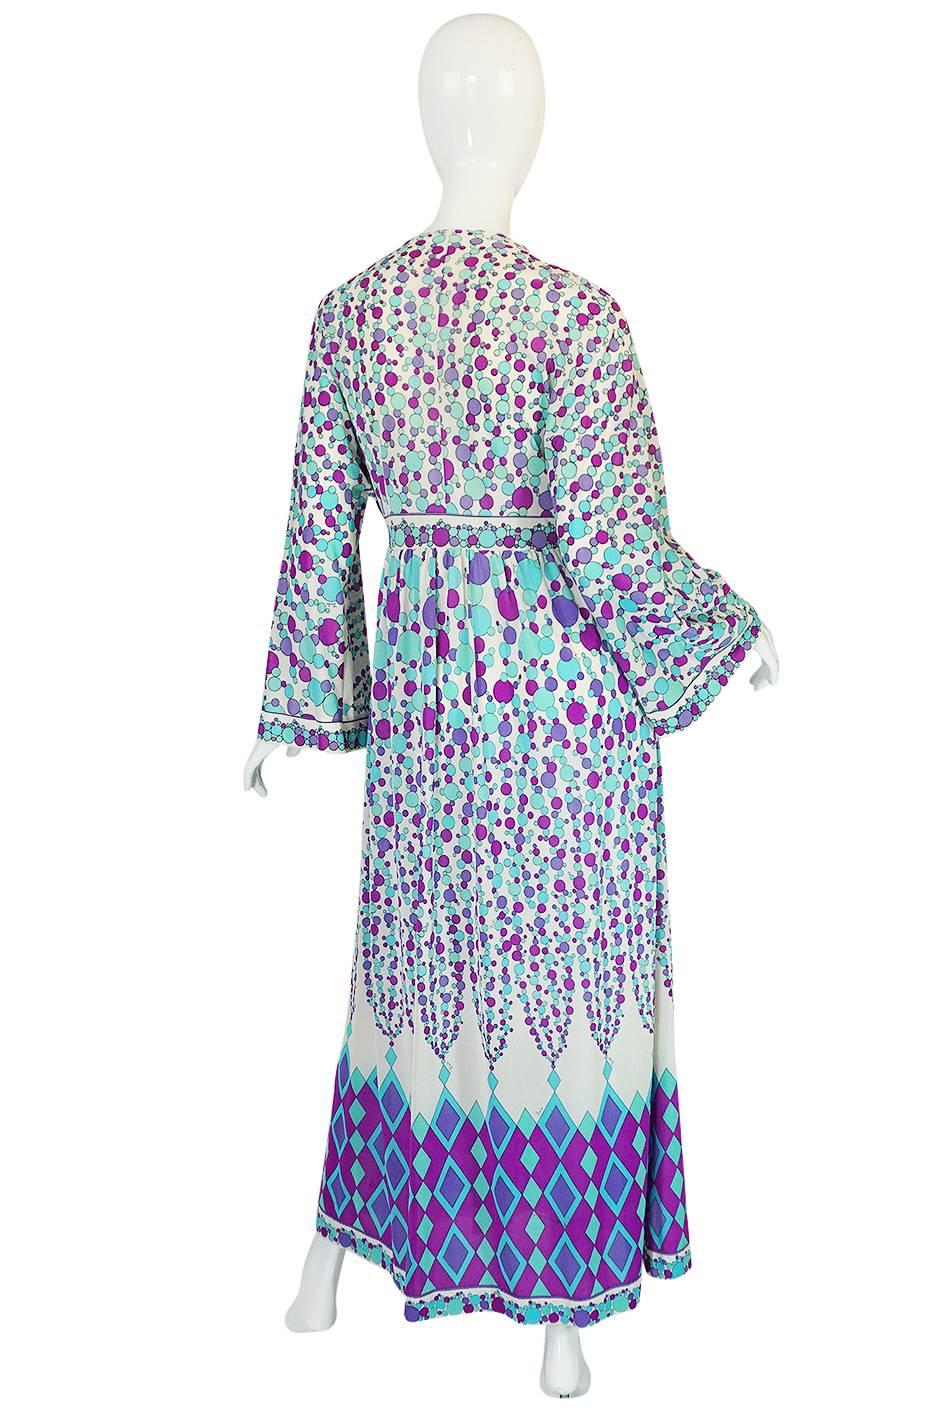 I love this bright little Emilio Pucci for Formfit Rogers zip front caftan robe. It was of course meant to be hostess level lingerie when it was originally made but would be completely wearable as a maxi dress, or can be used as a chic beach cover